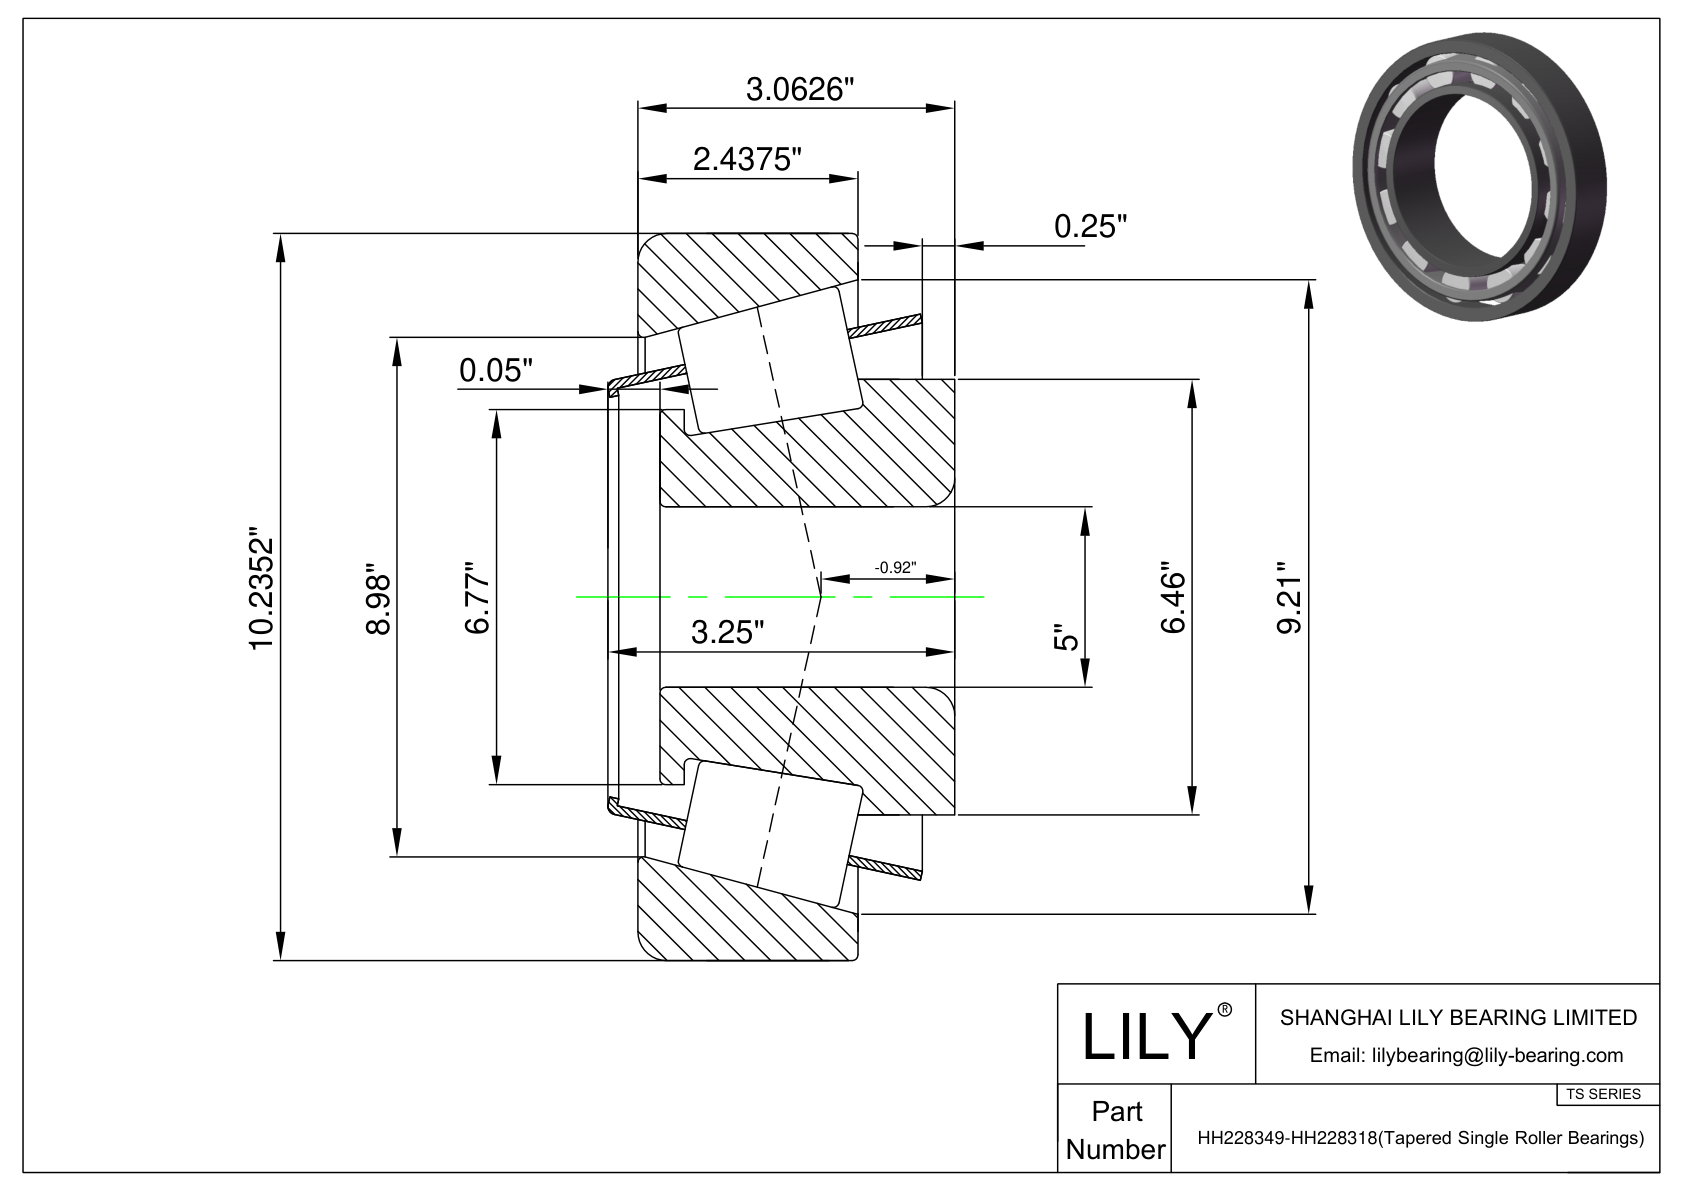 HH228349-HH228318 TS (Tapered Single Roller Bearings) (Imperial) cad drawing